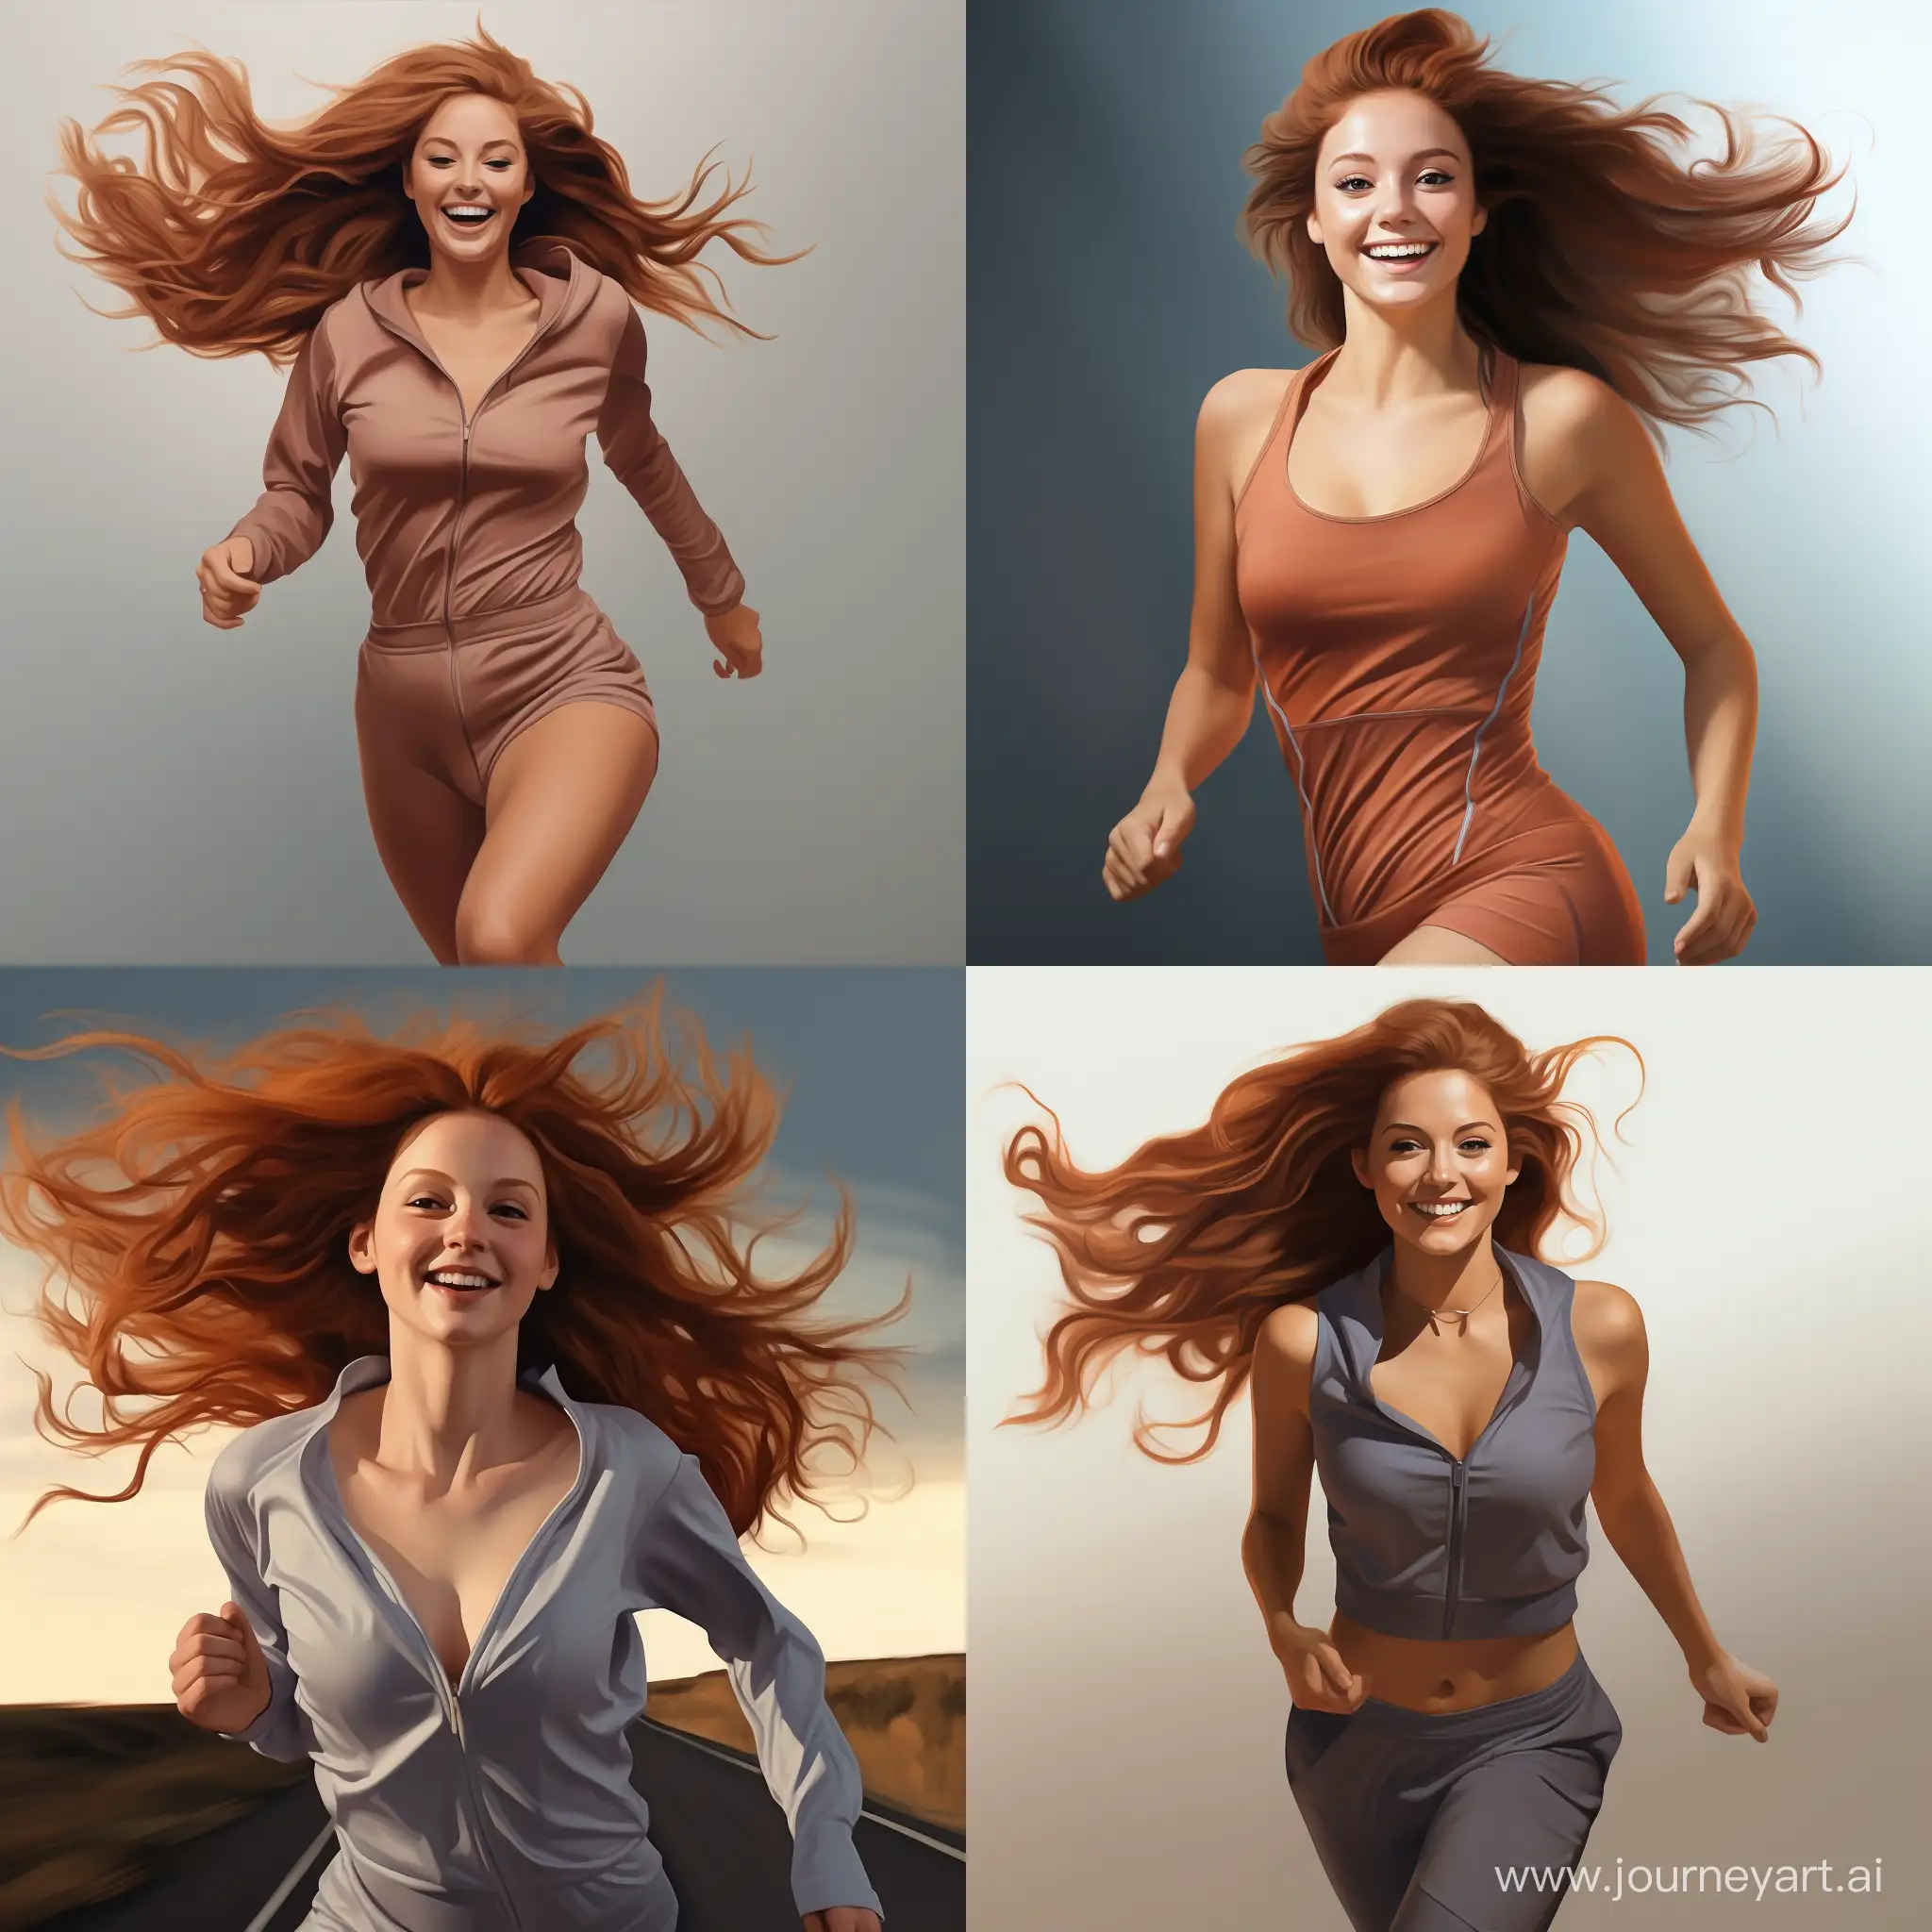 photorealistic image of a girl running. Wearing a jump suit. Long auburn hair. She is smiling. Thin waist, ample chest and strong legs.